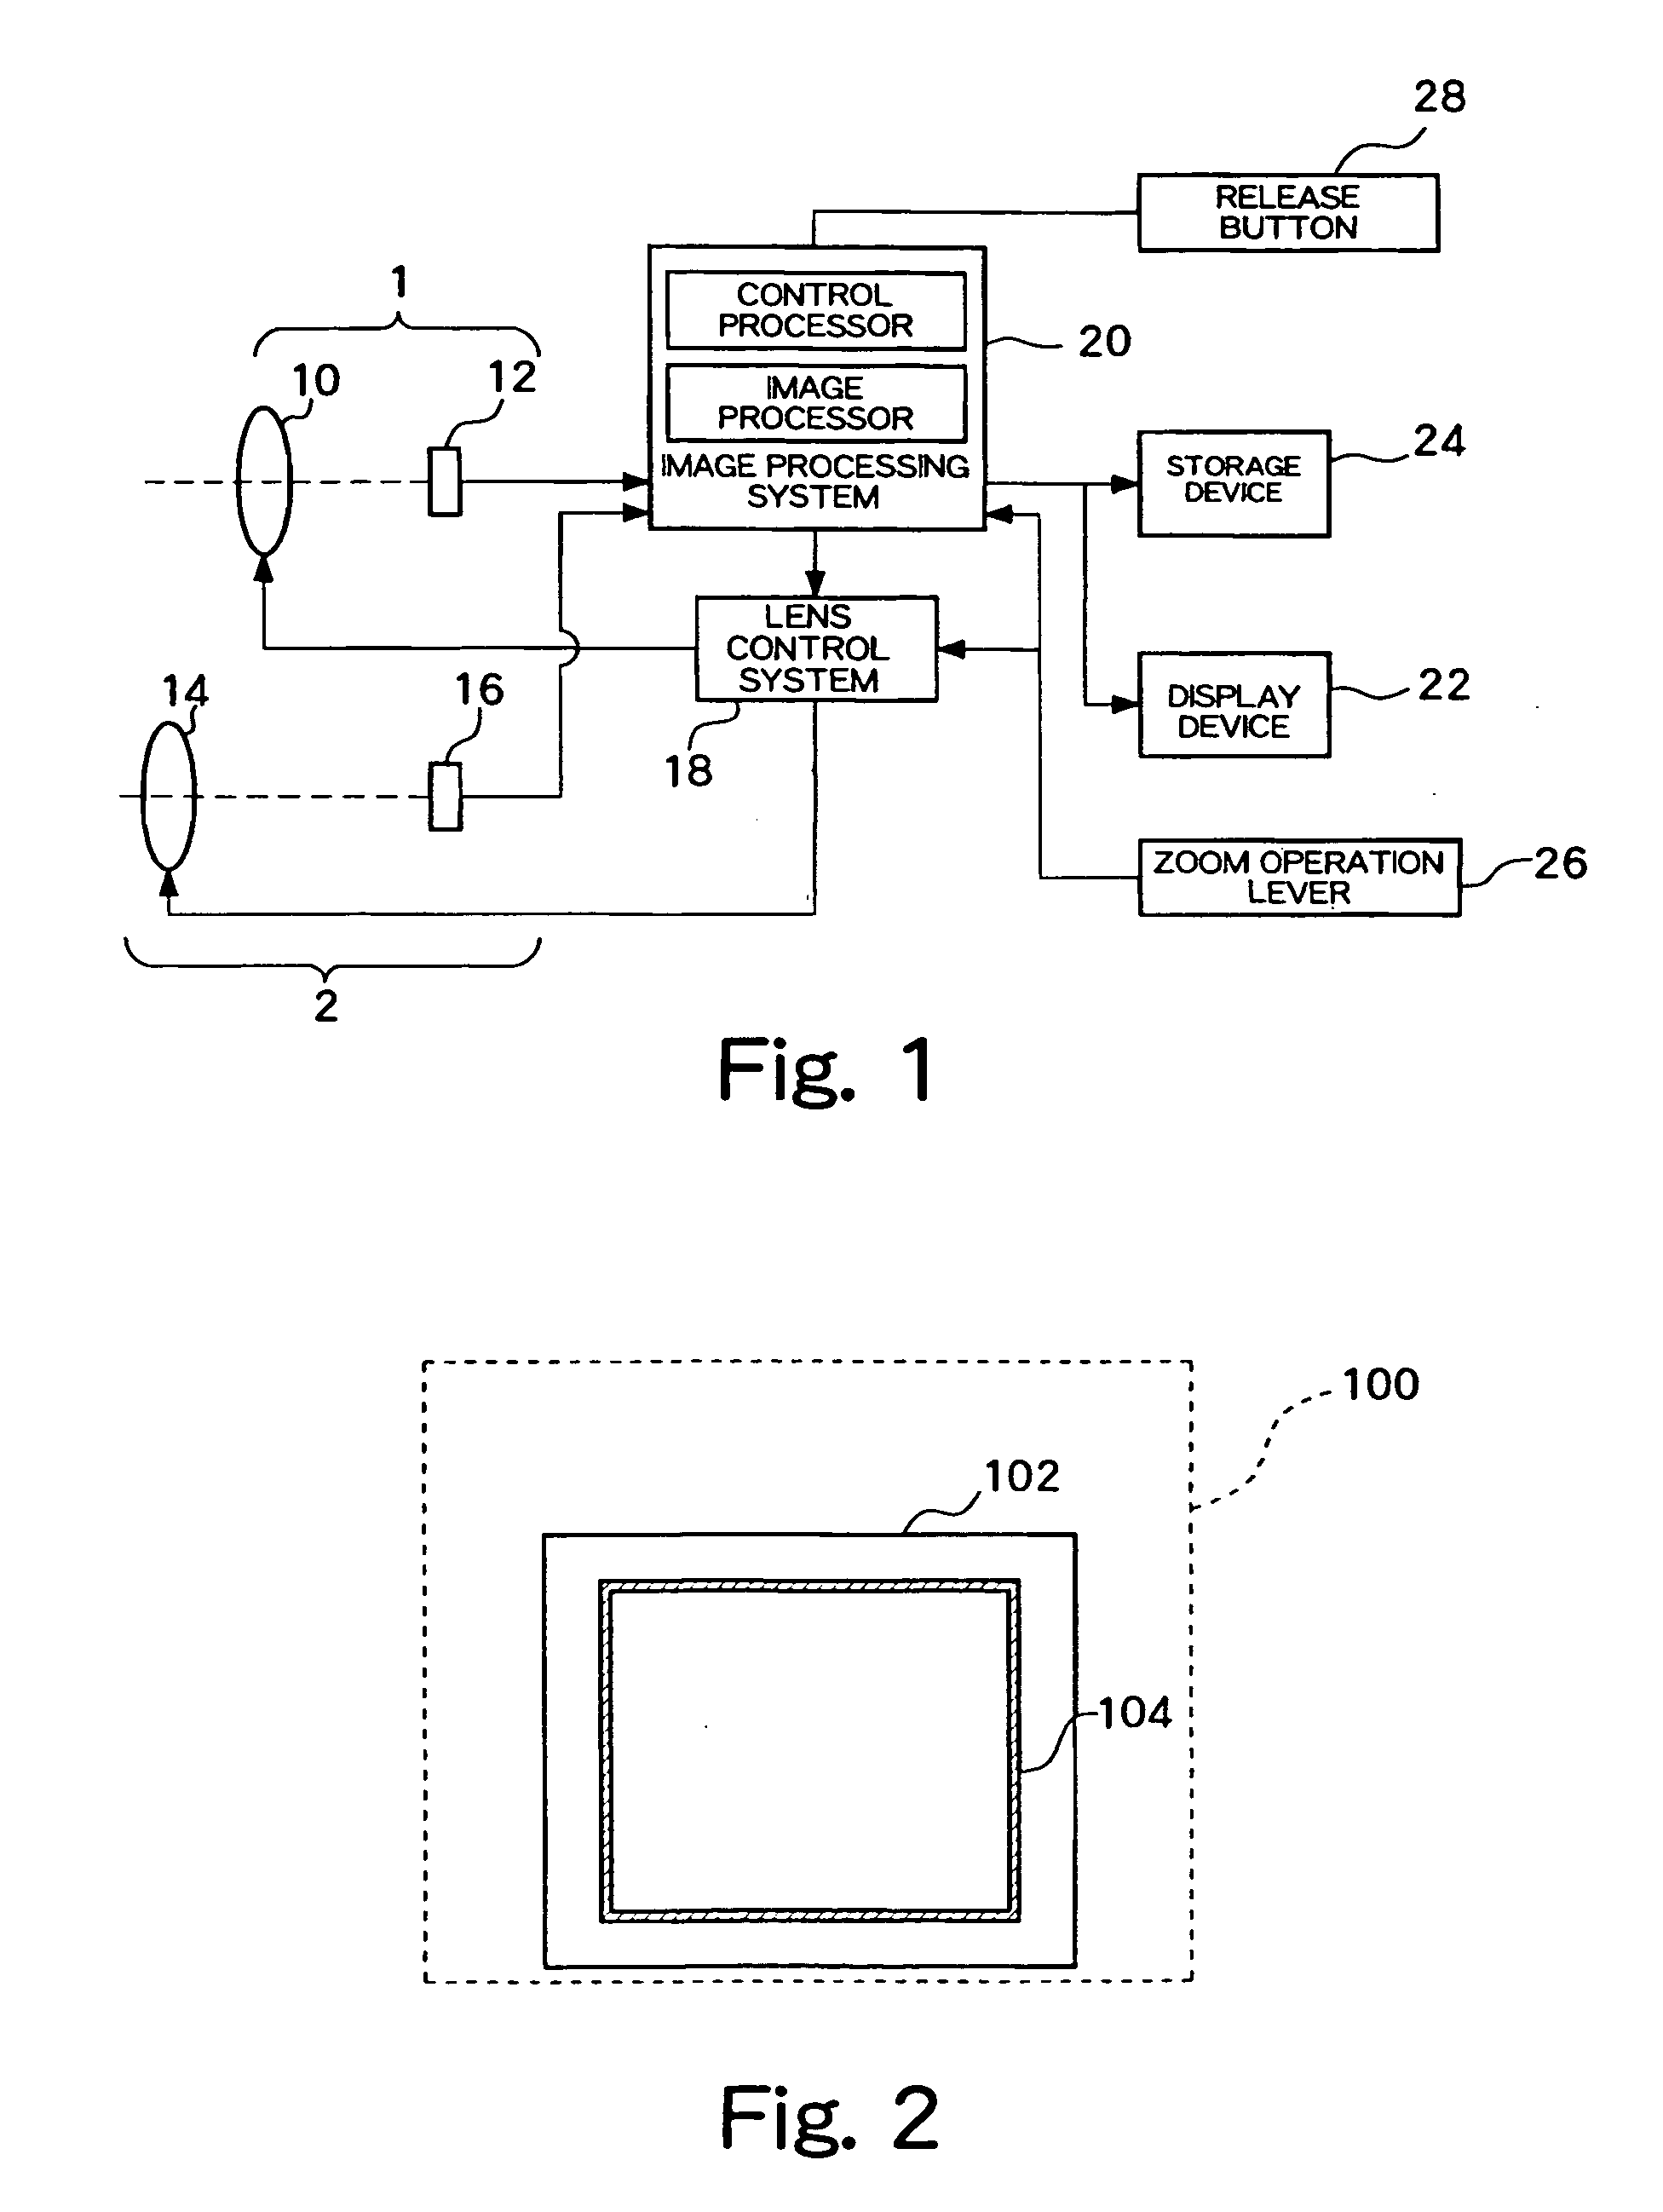 Image-capturing device having multiple optical systems